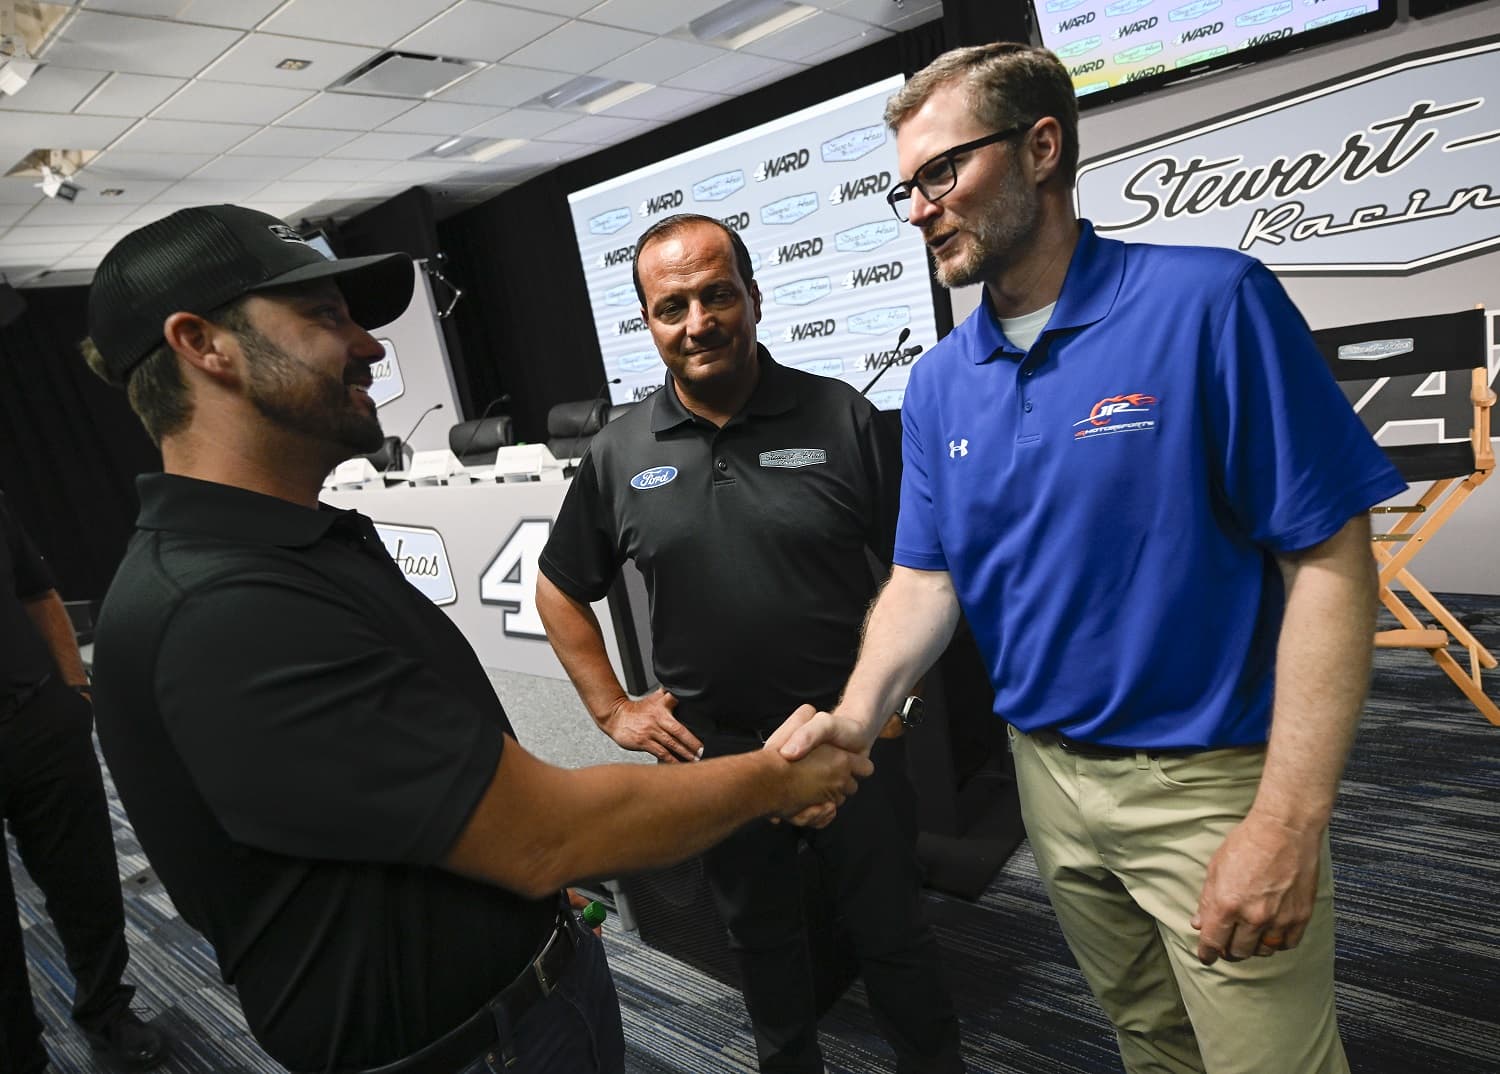 Josh Berry, left, greets Dale Earnhardt Jr. after being introduced as the new driver of the No. 4 Stewart-Hass Racing Ford at Charlotte Motor Speedway on June 21, 2023.